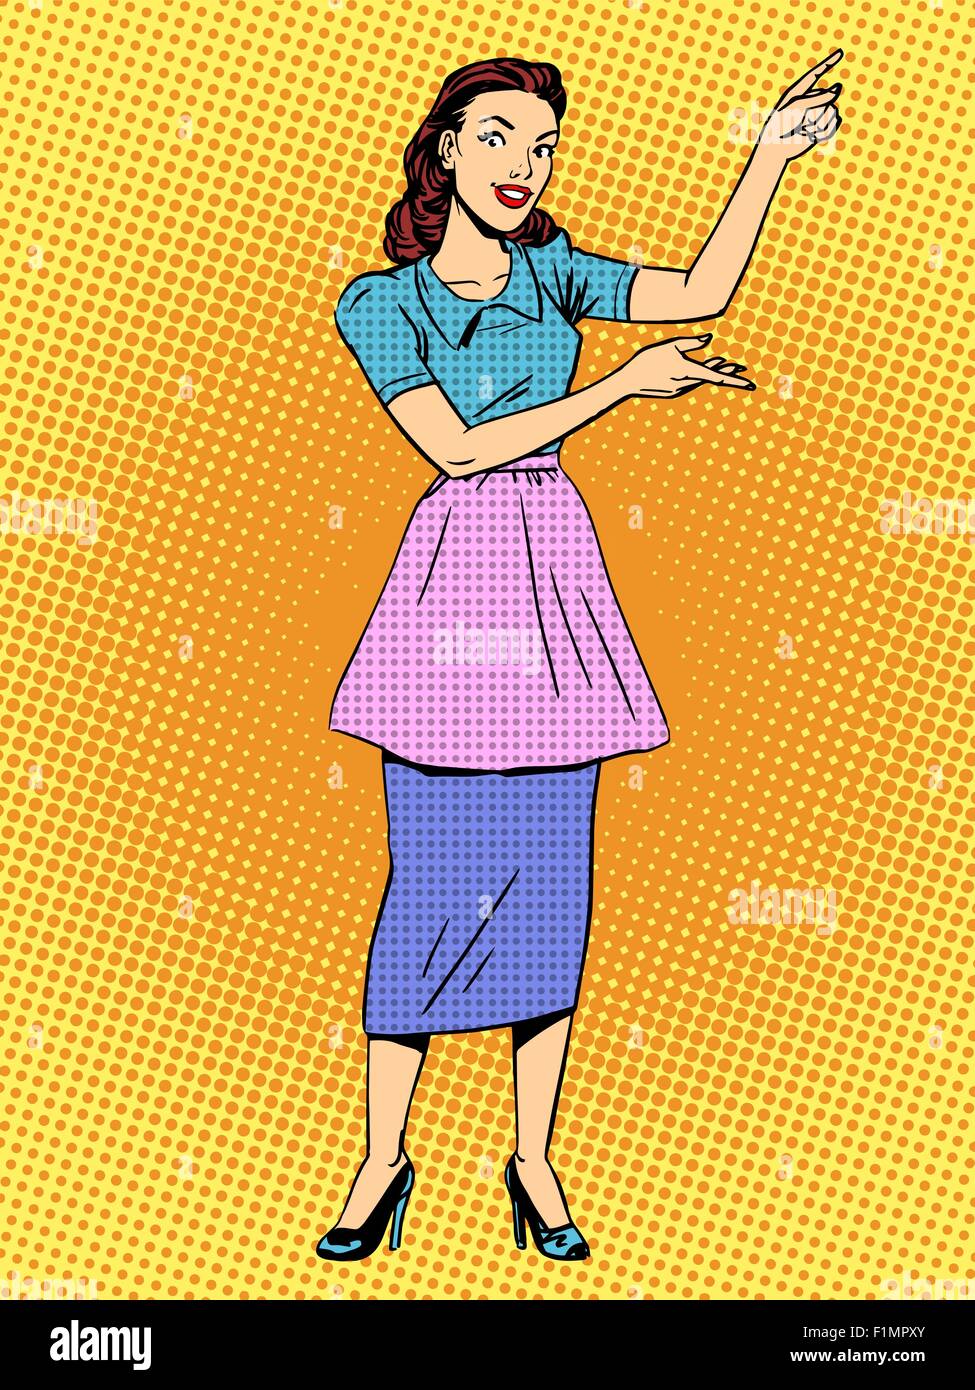 Housewife shows hands retro style pop art Stock Vector